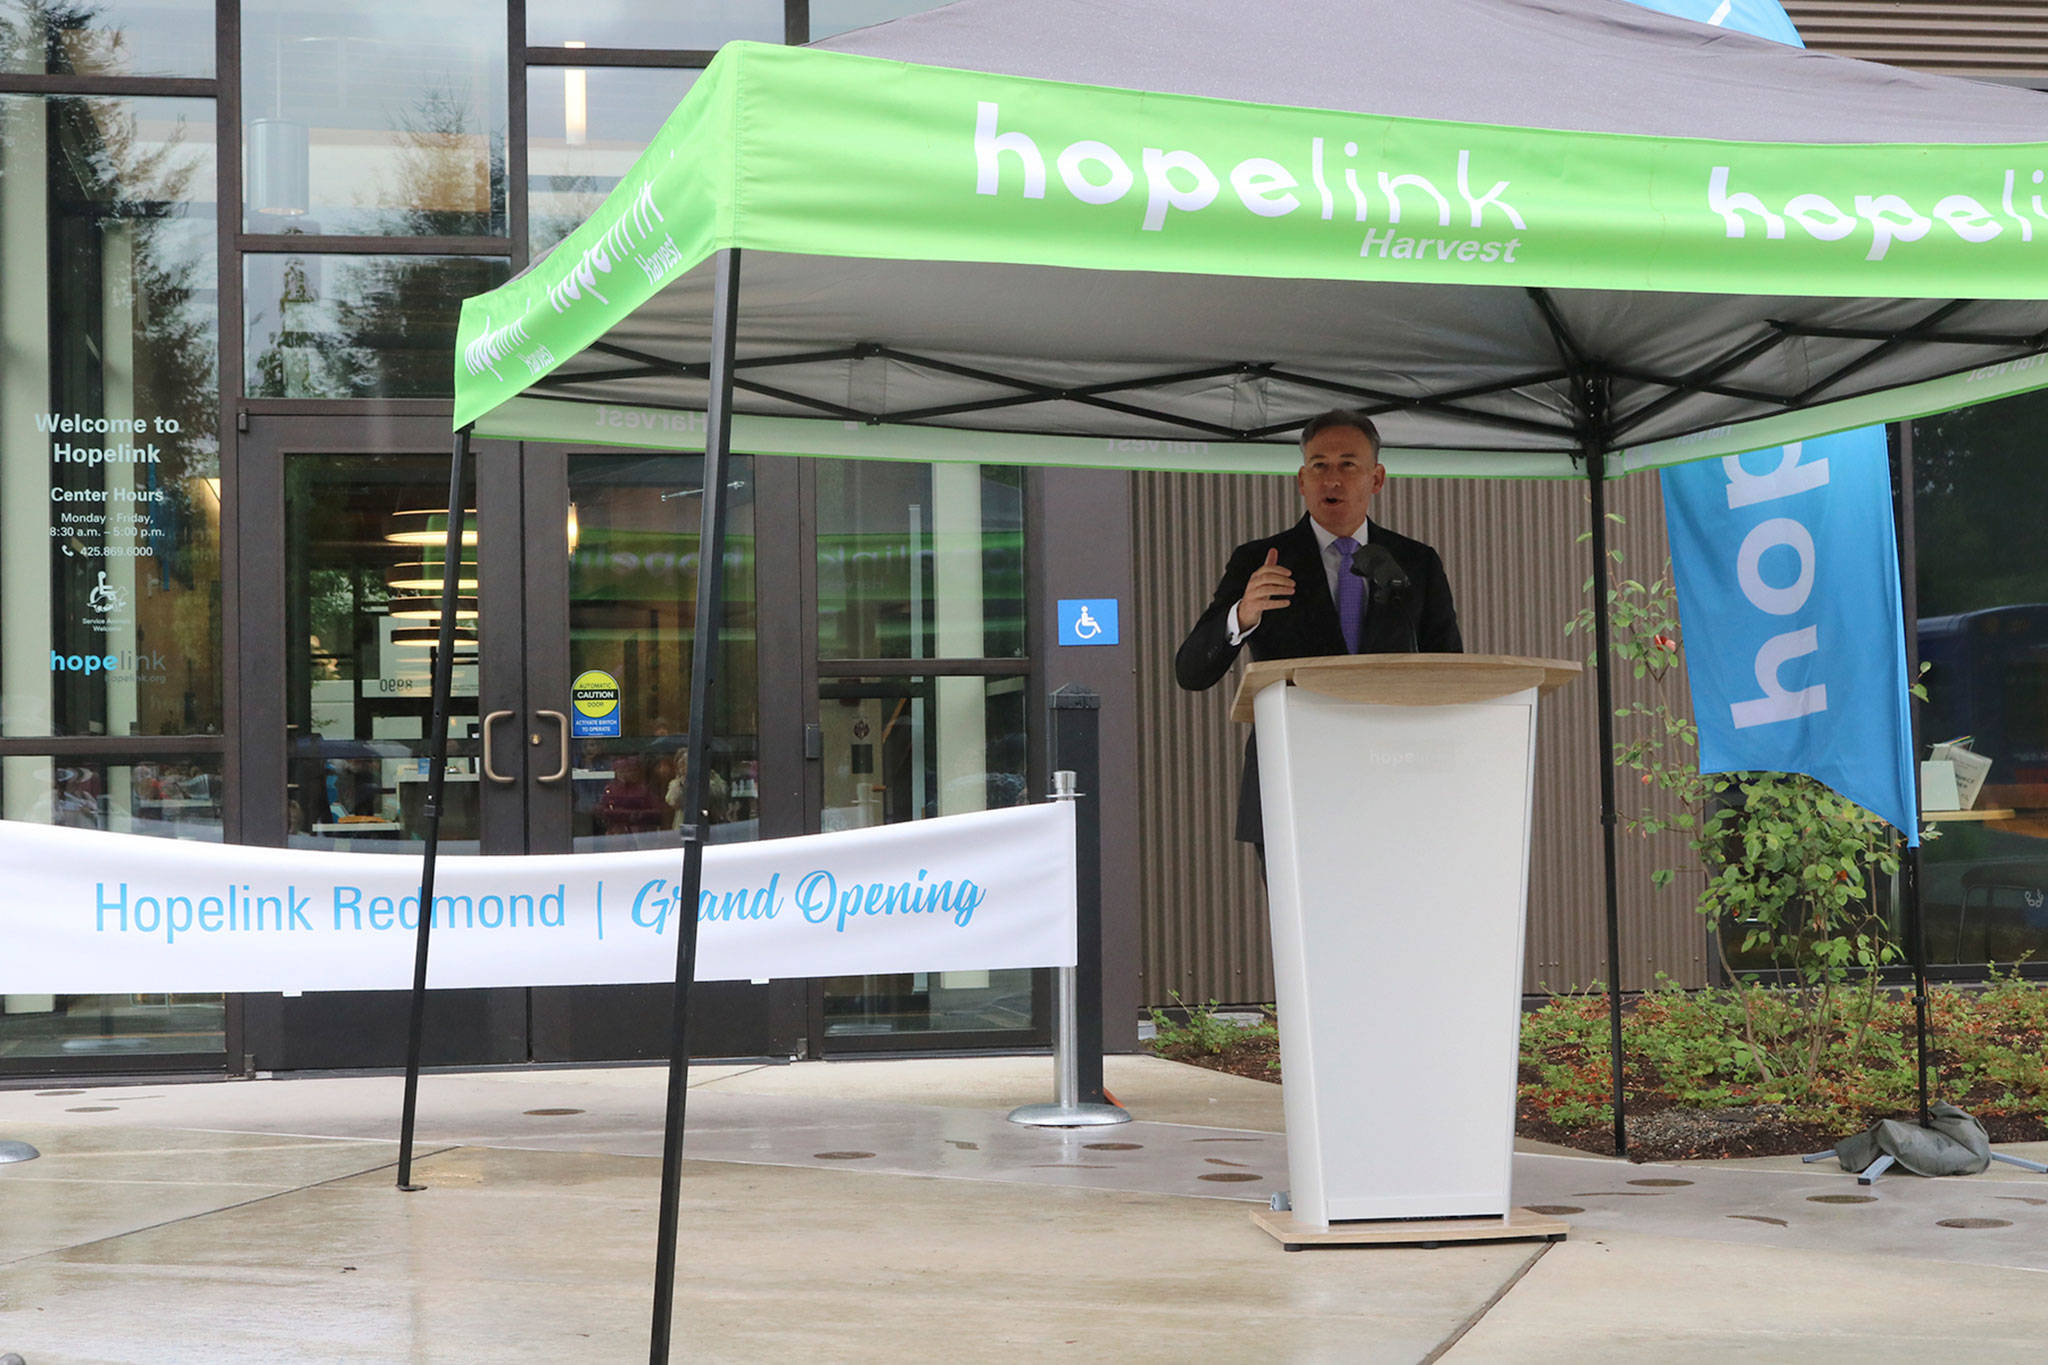 King County Executive Dow Constantine speaks about the impact Hopelink has in the region, by helping people gain the tools to exit poverty and homelessness. Katie Metzger/staff photo